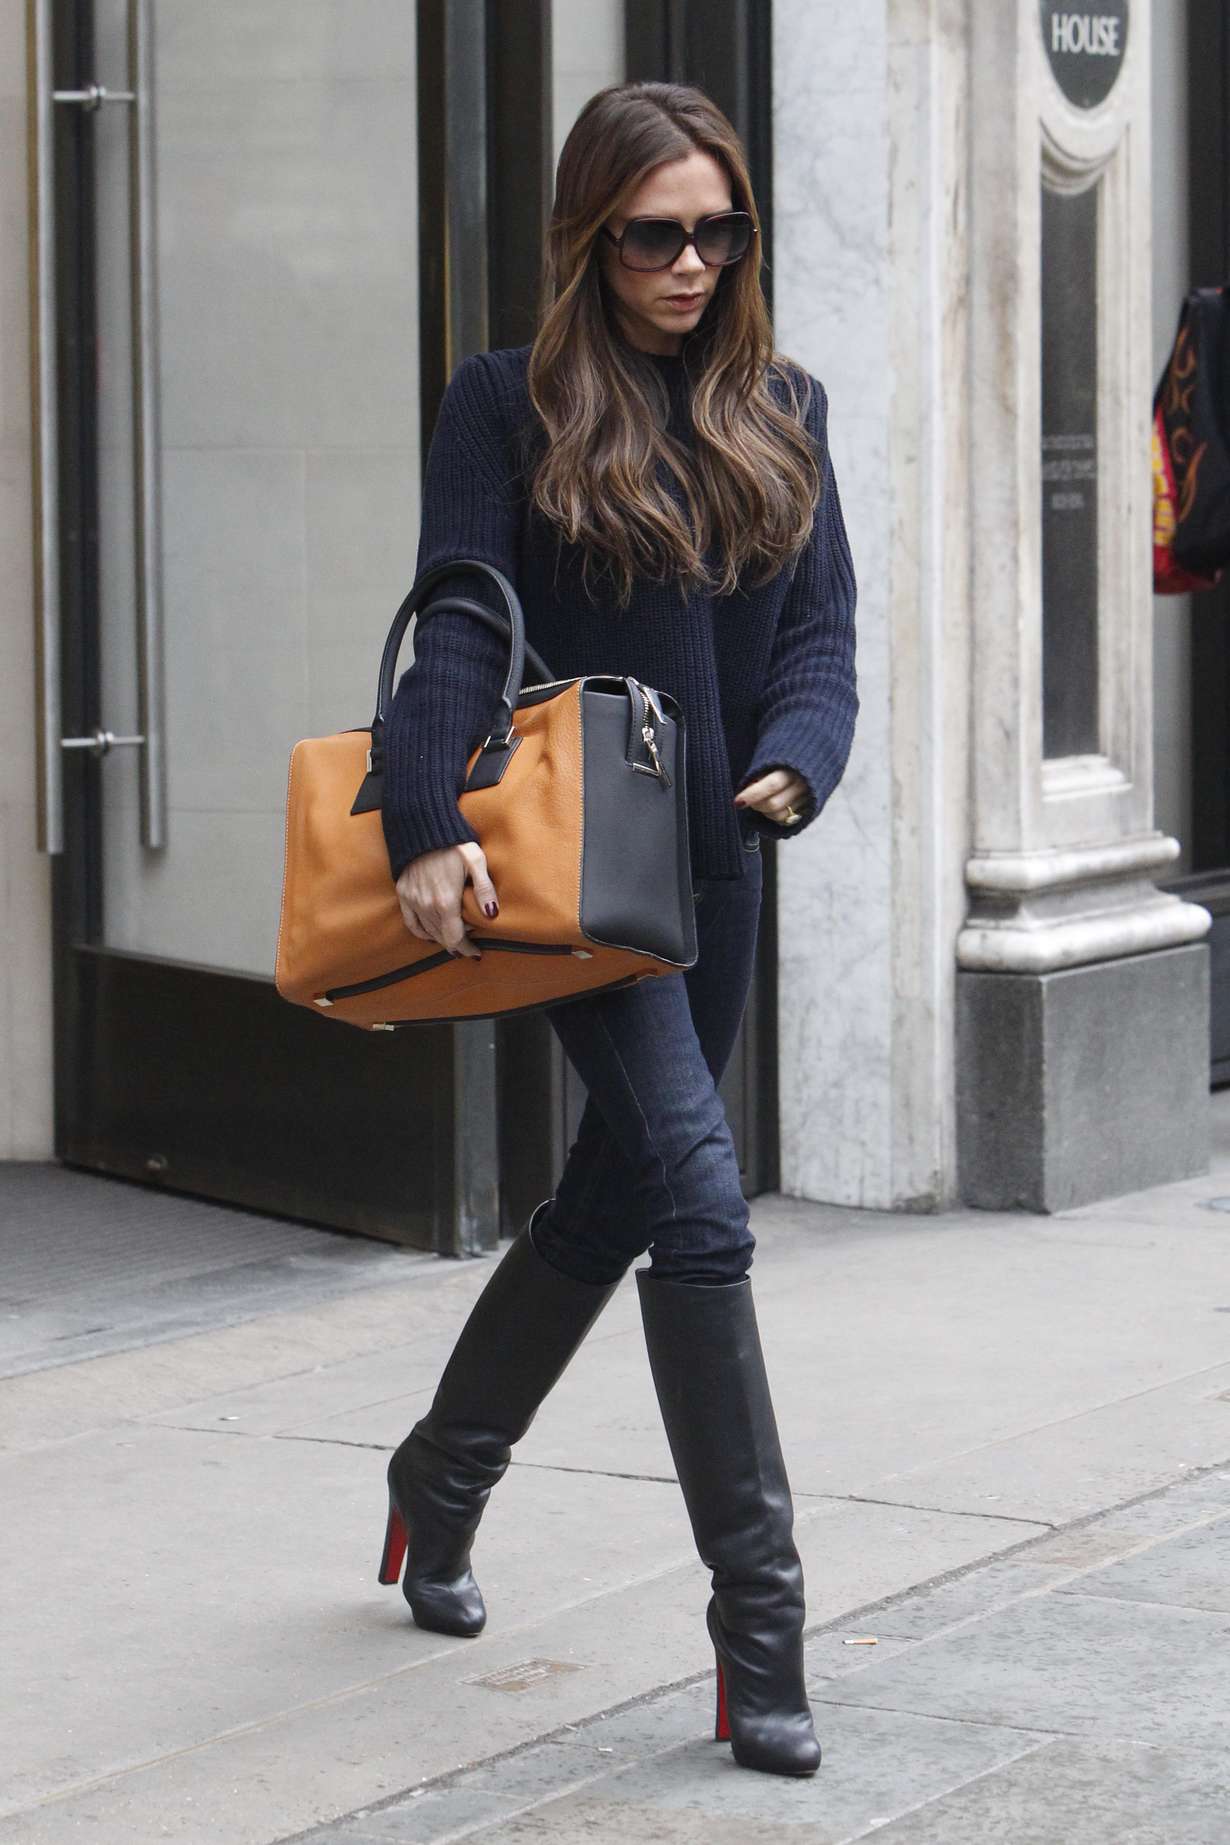 Victoria Beckham – In Jeans and Boots-02 – GotCeleb